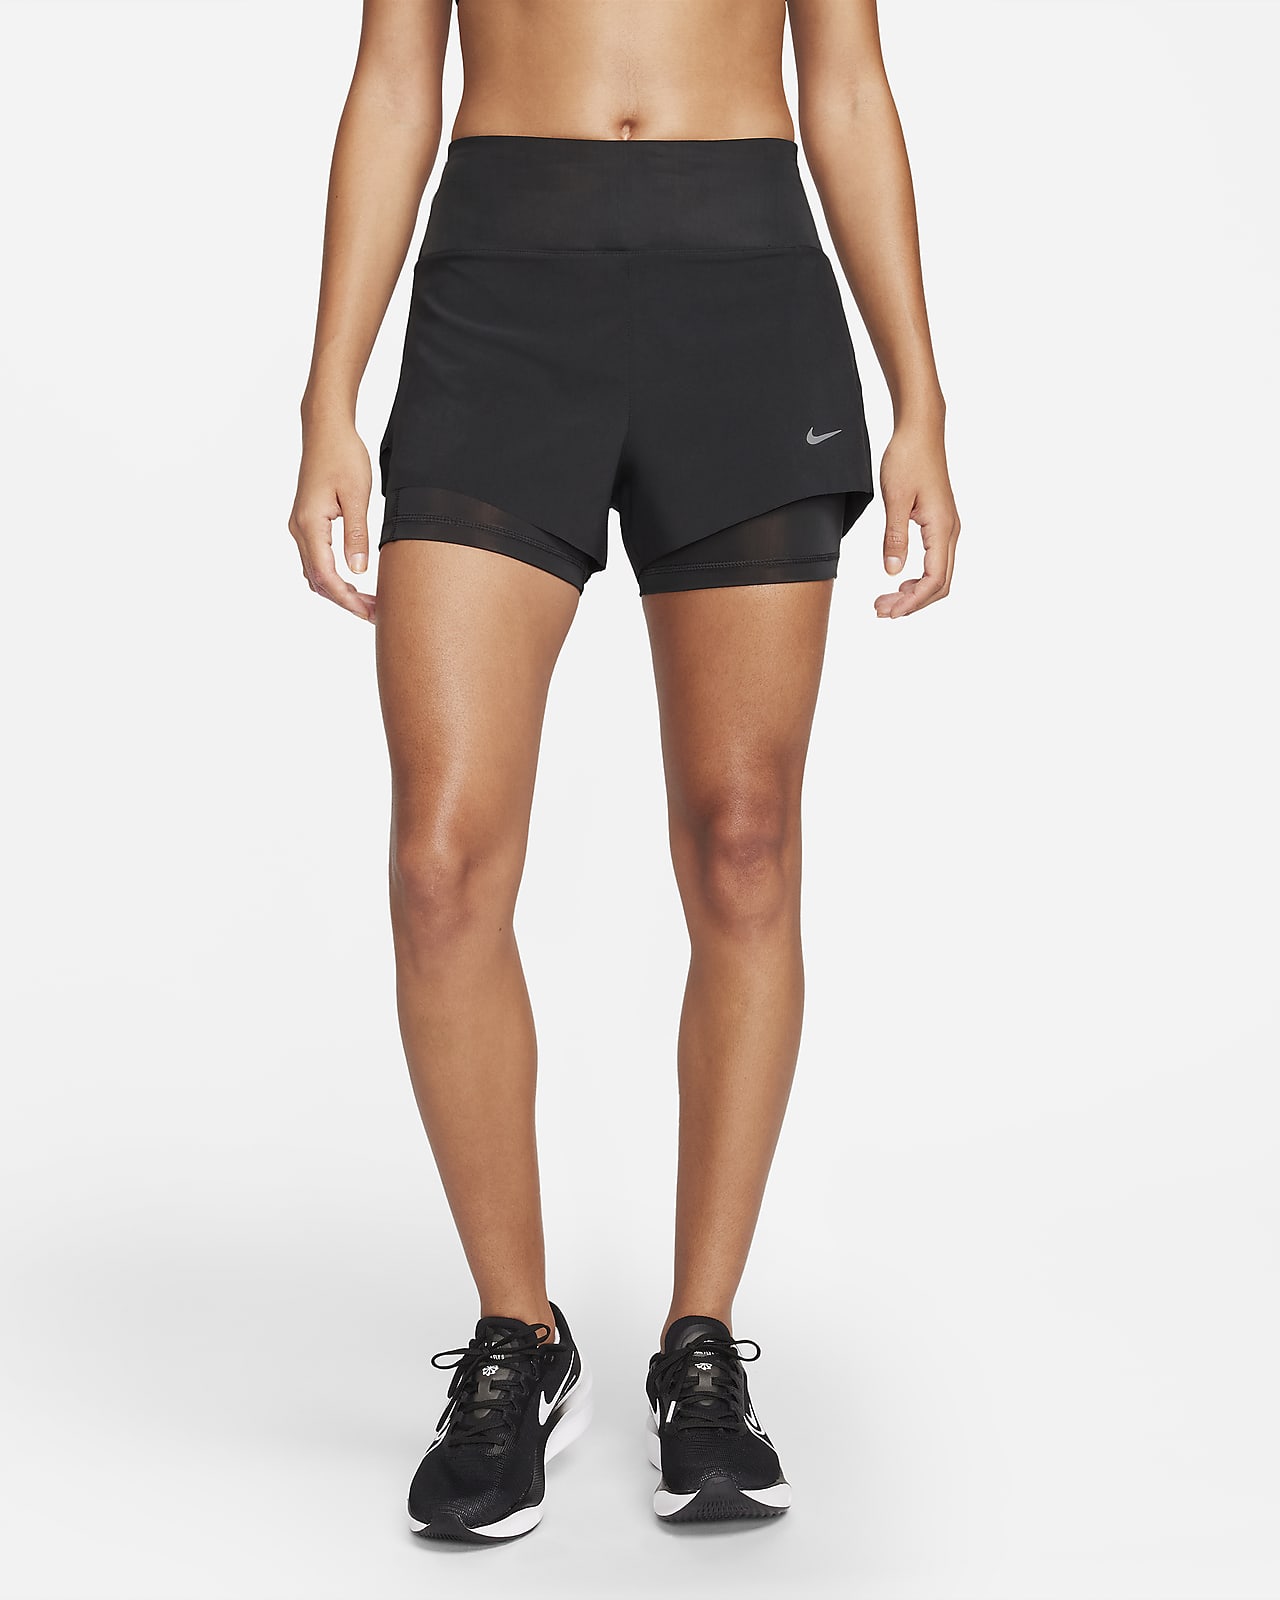 Nike Dri-FIT Swift 3" 2-in-1 Running Shorts with Pockets. Nike.com